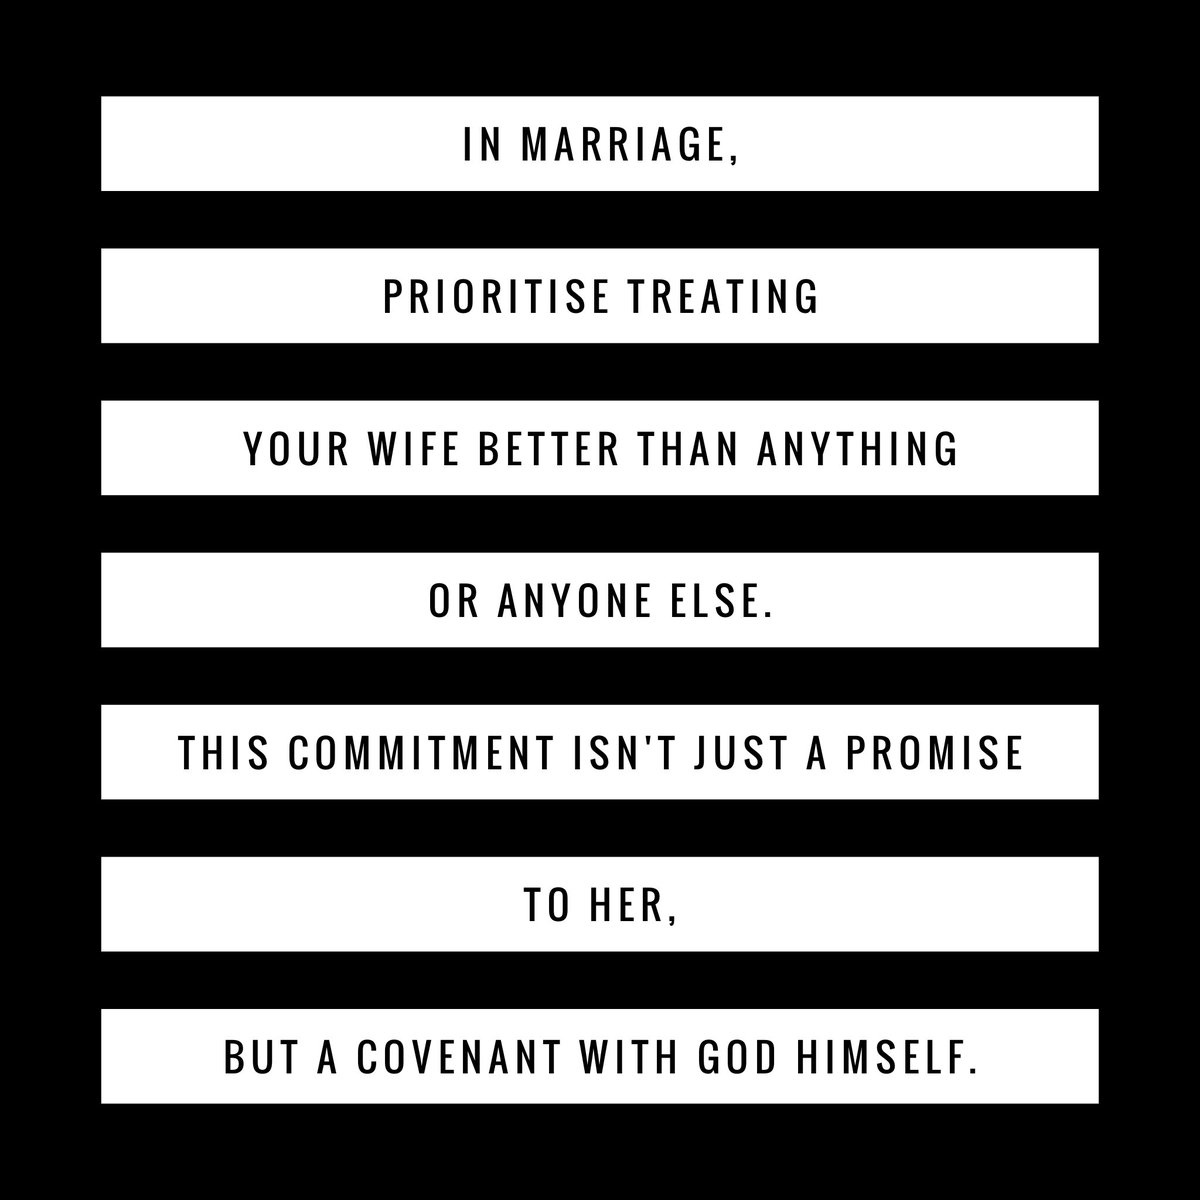 Marriage Hack: Your covenant with God is to treat your wife better than anything or anyone else. Loving her like Christ loves the church is your highest calling. Fail at that, and you've missed the mark on everything. #MarriageHacks